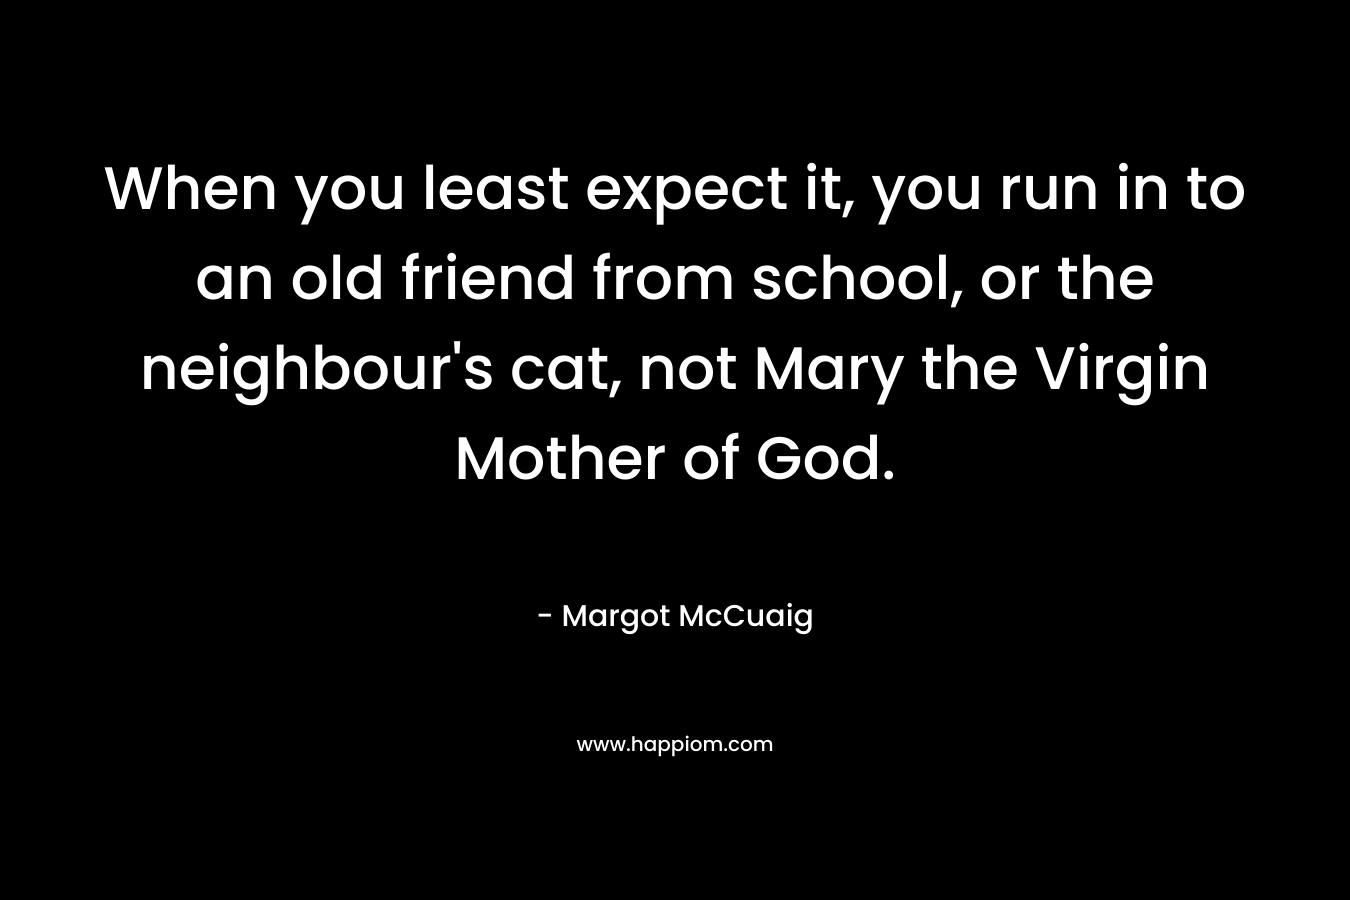 When you least expect it, you run in to an old friend from school, or the neighbour's cat, not Mary the Virgin Mother of God.